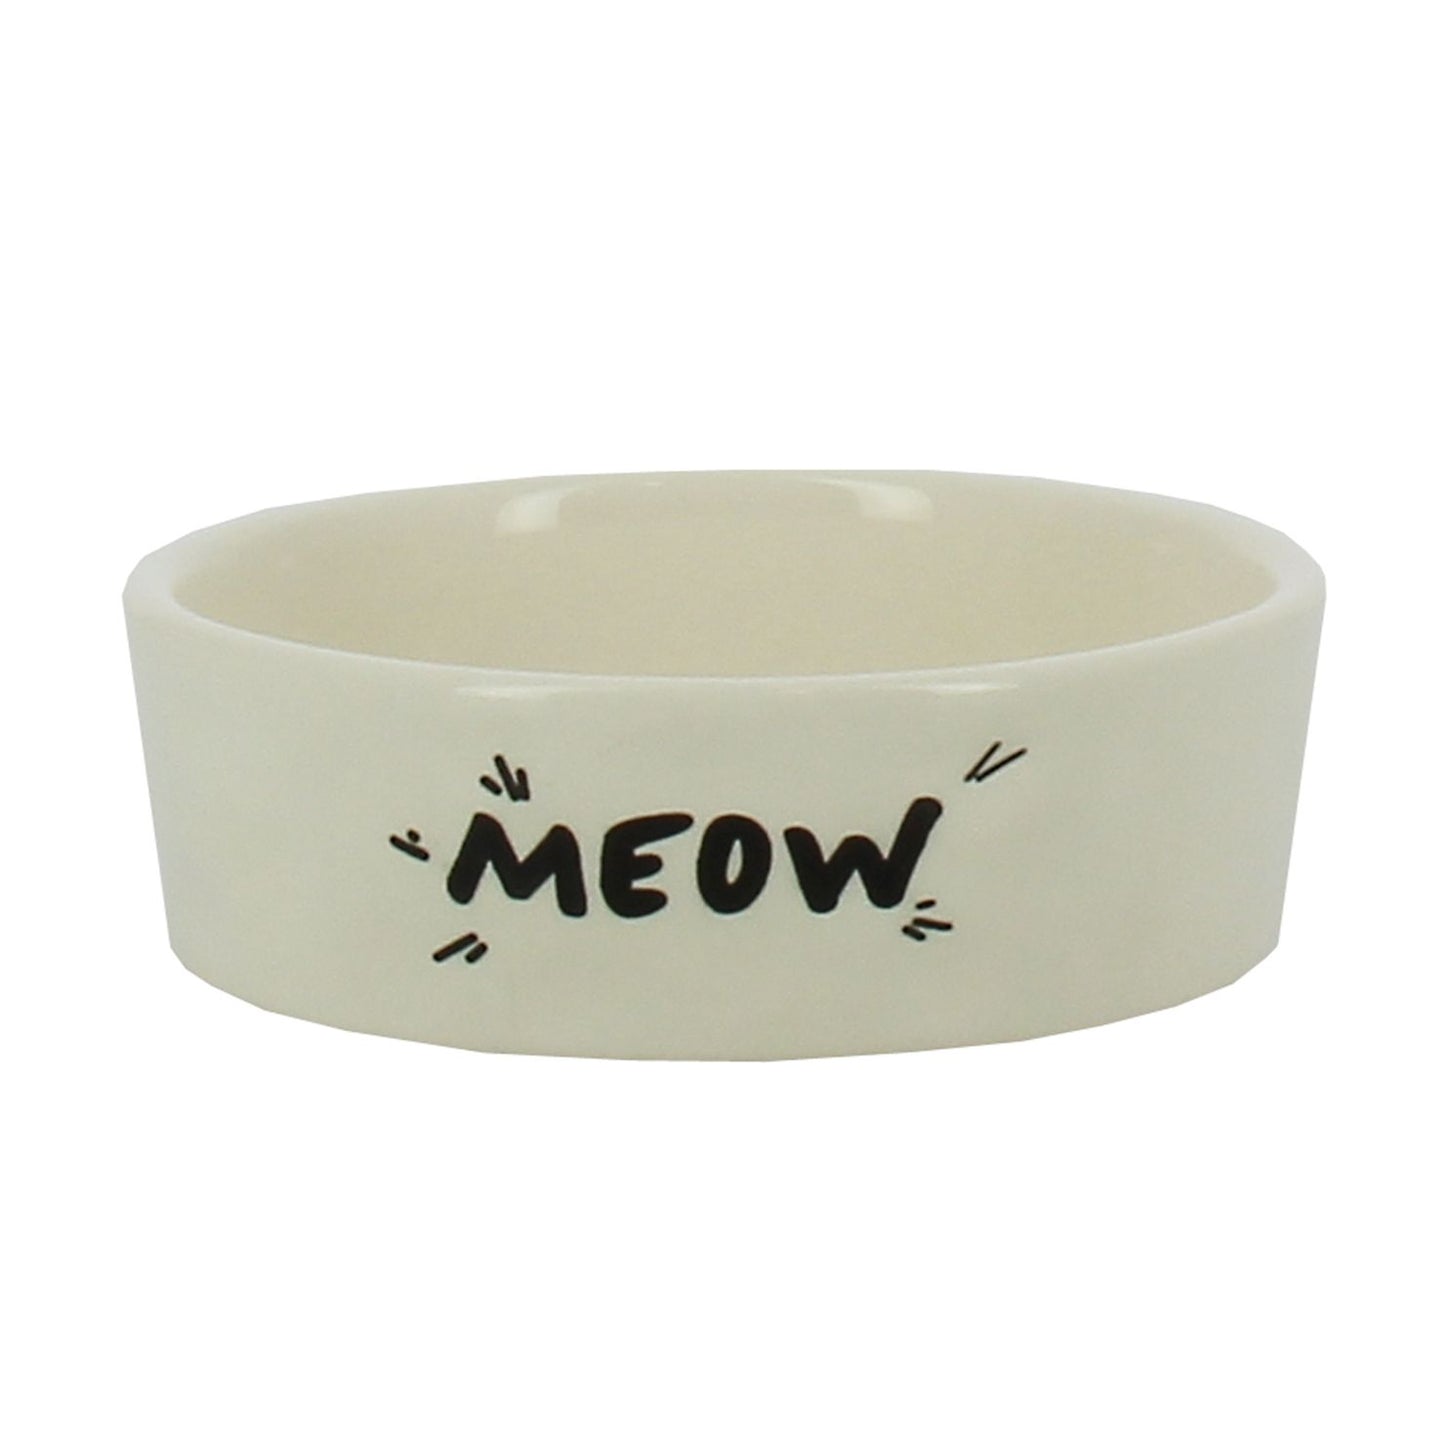 cat bowl food water meow ceramic dishwasher safe Best In Show